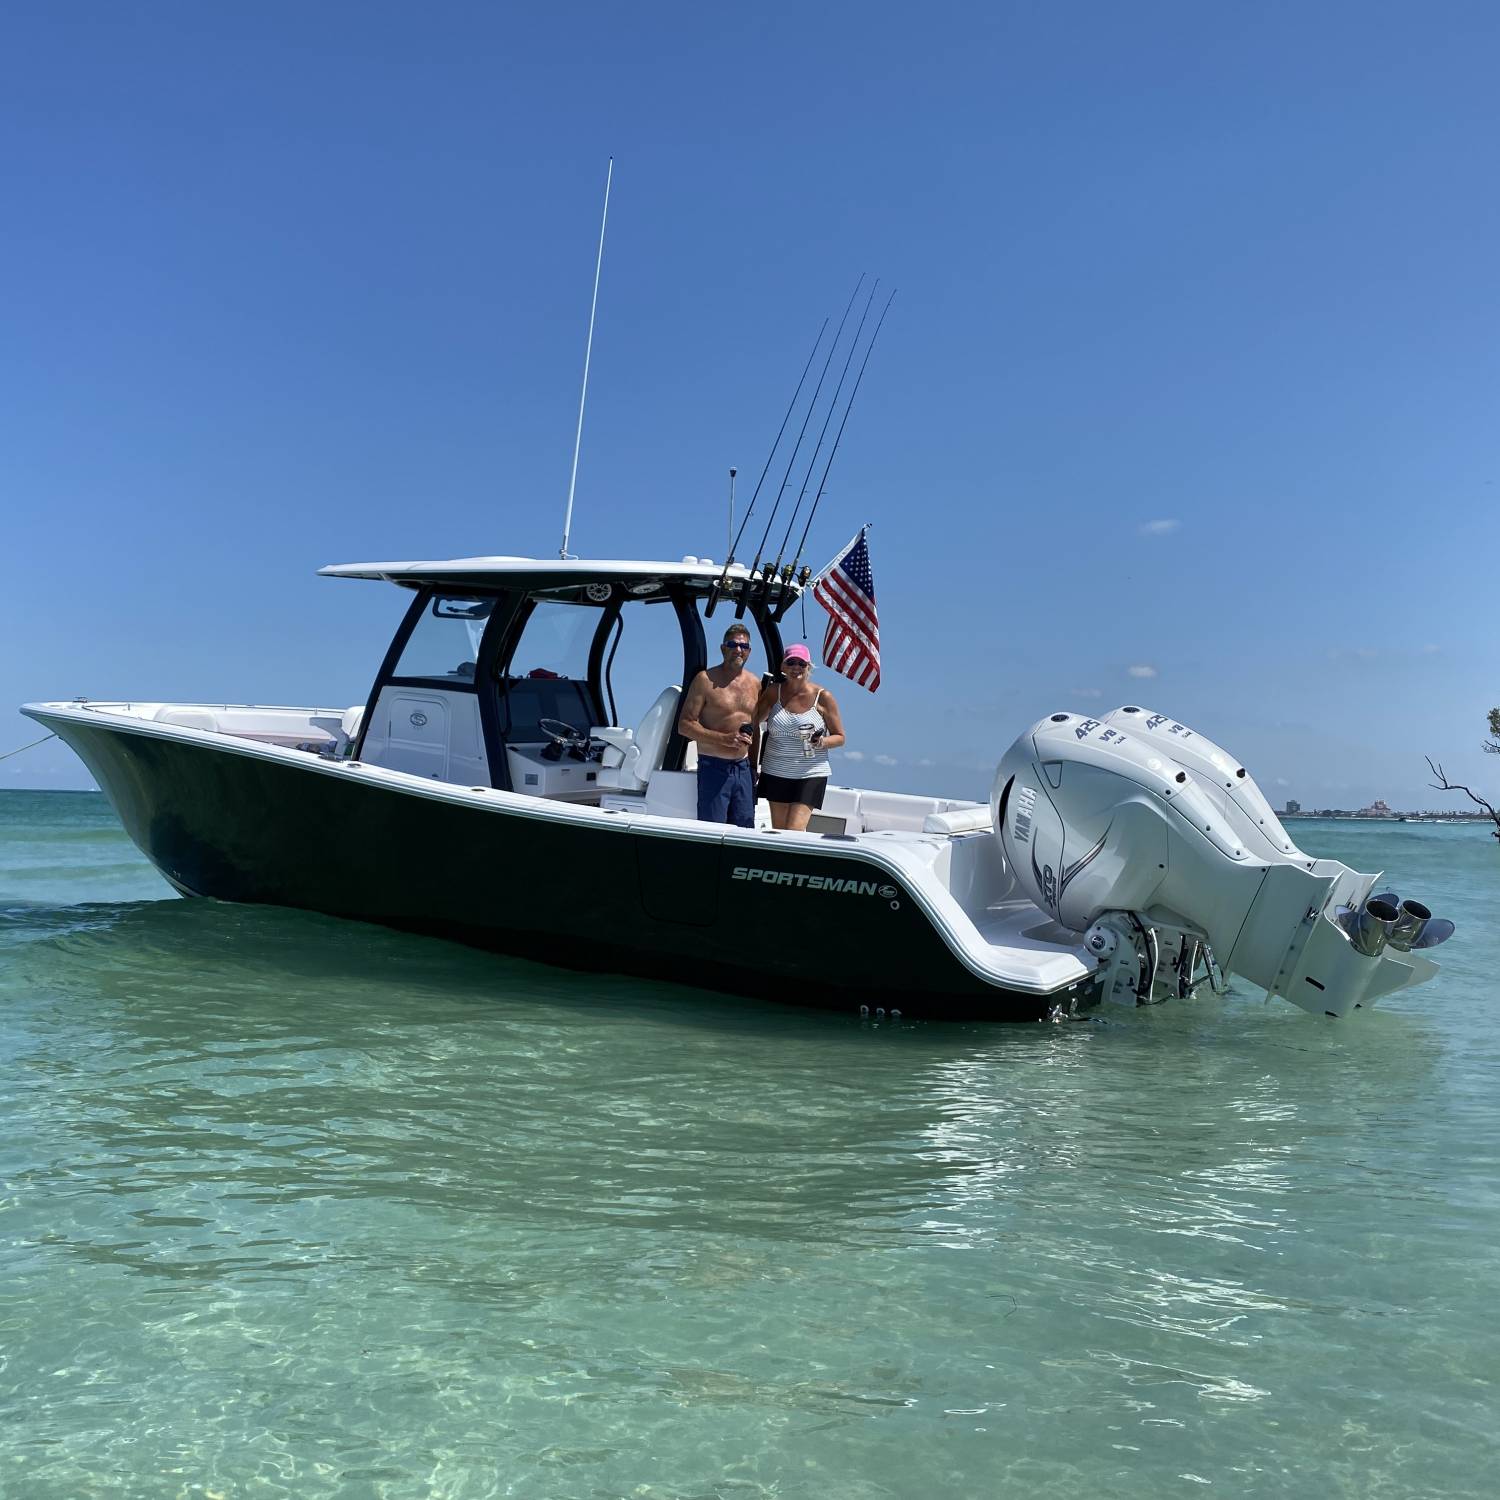 Title: "Stephanie" - On board their Sportsman Open 322 Center Console - Location: St. Petersburg, Florida. Participating in the Photo Contest #SportsmanMay